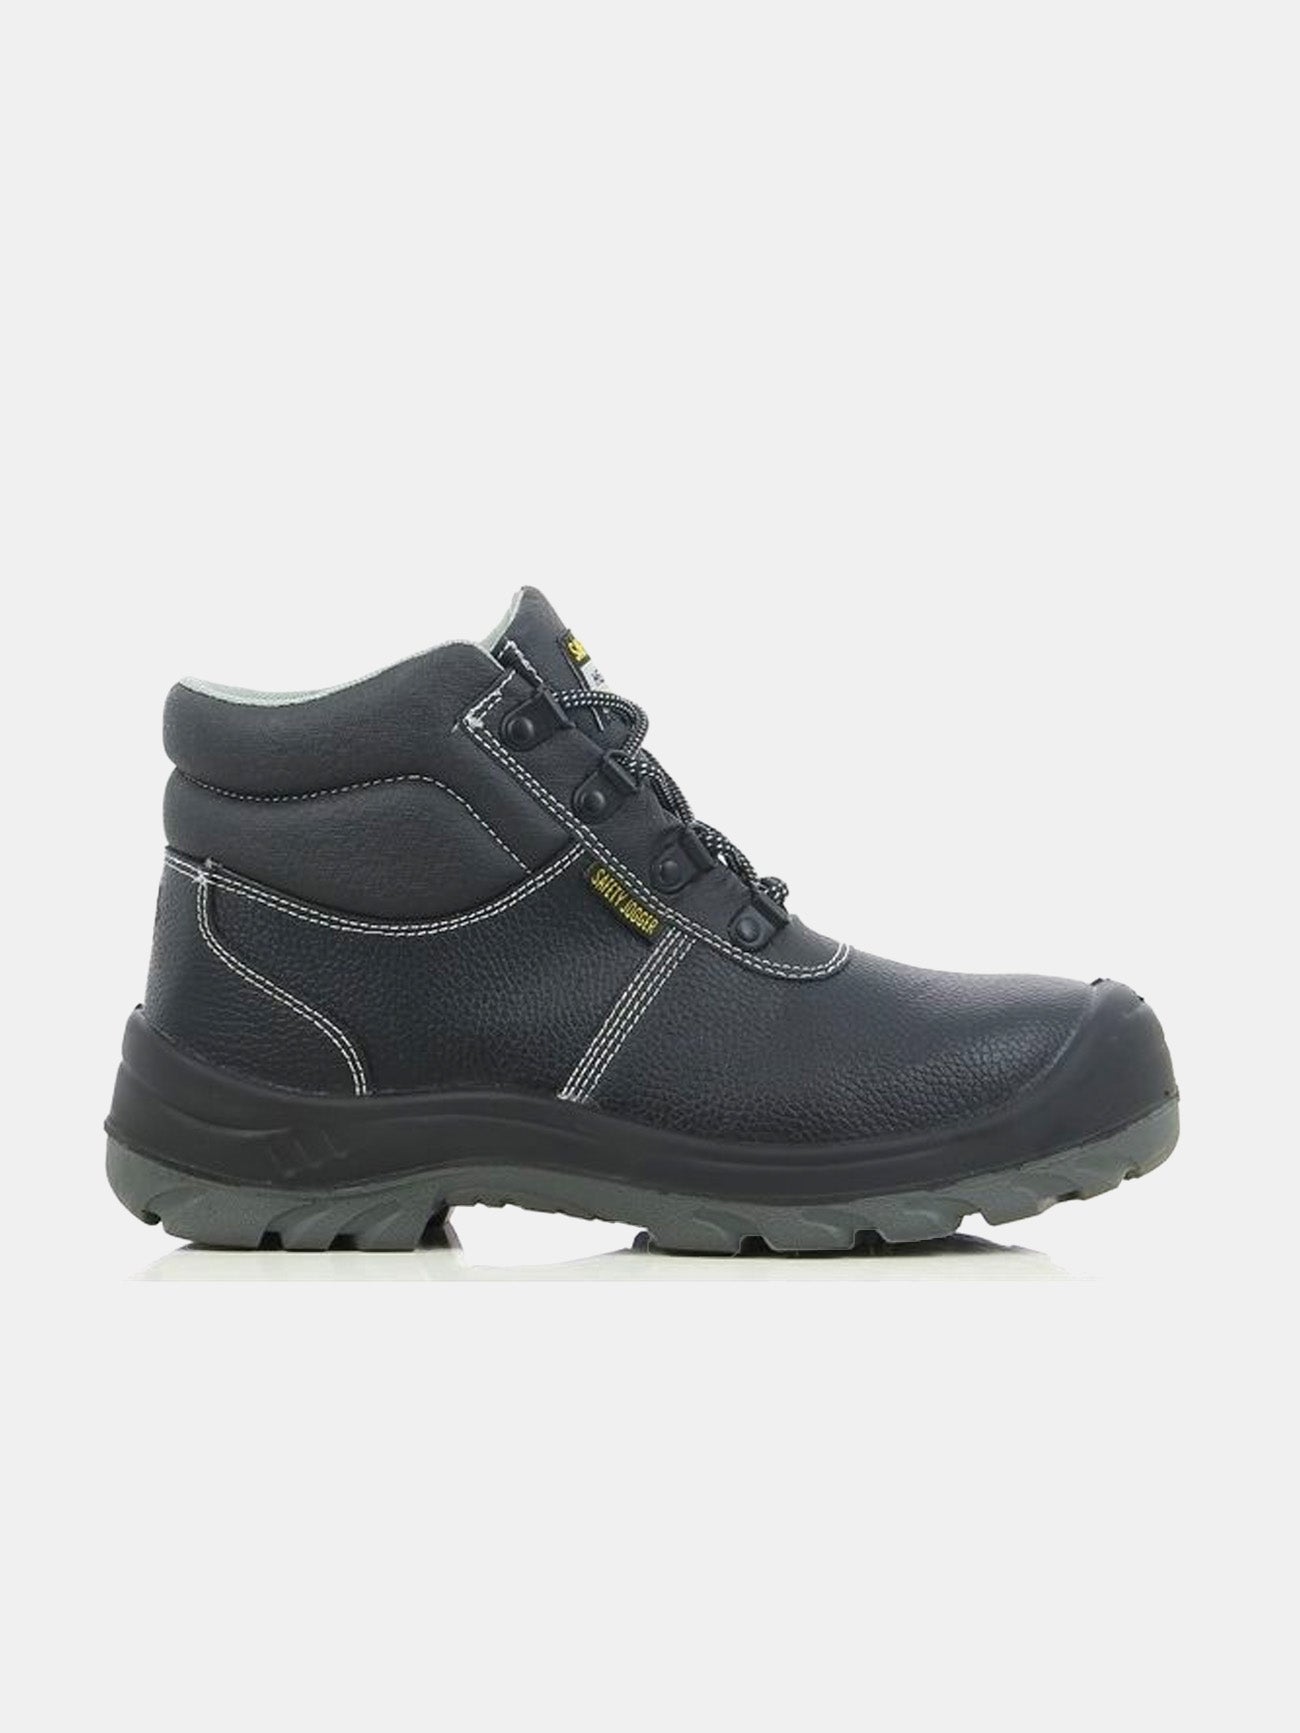 Safety Jogger Men's Bestboy S3 SR FO Safety Boots